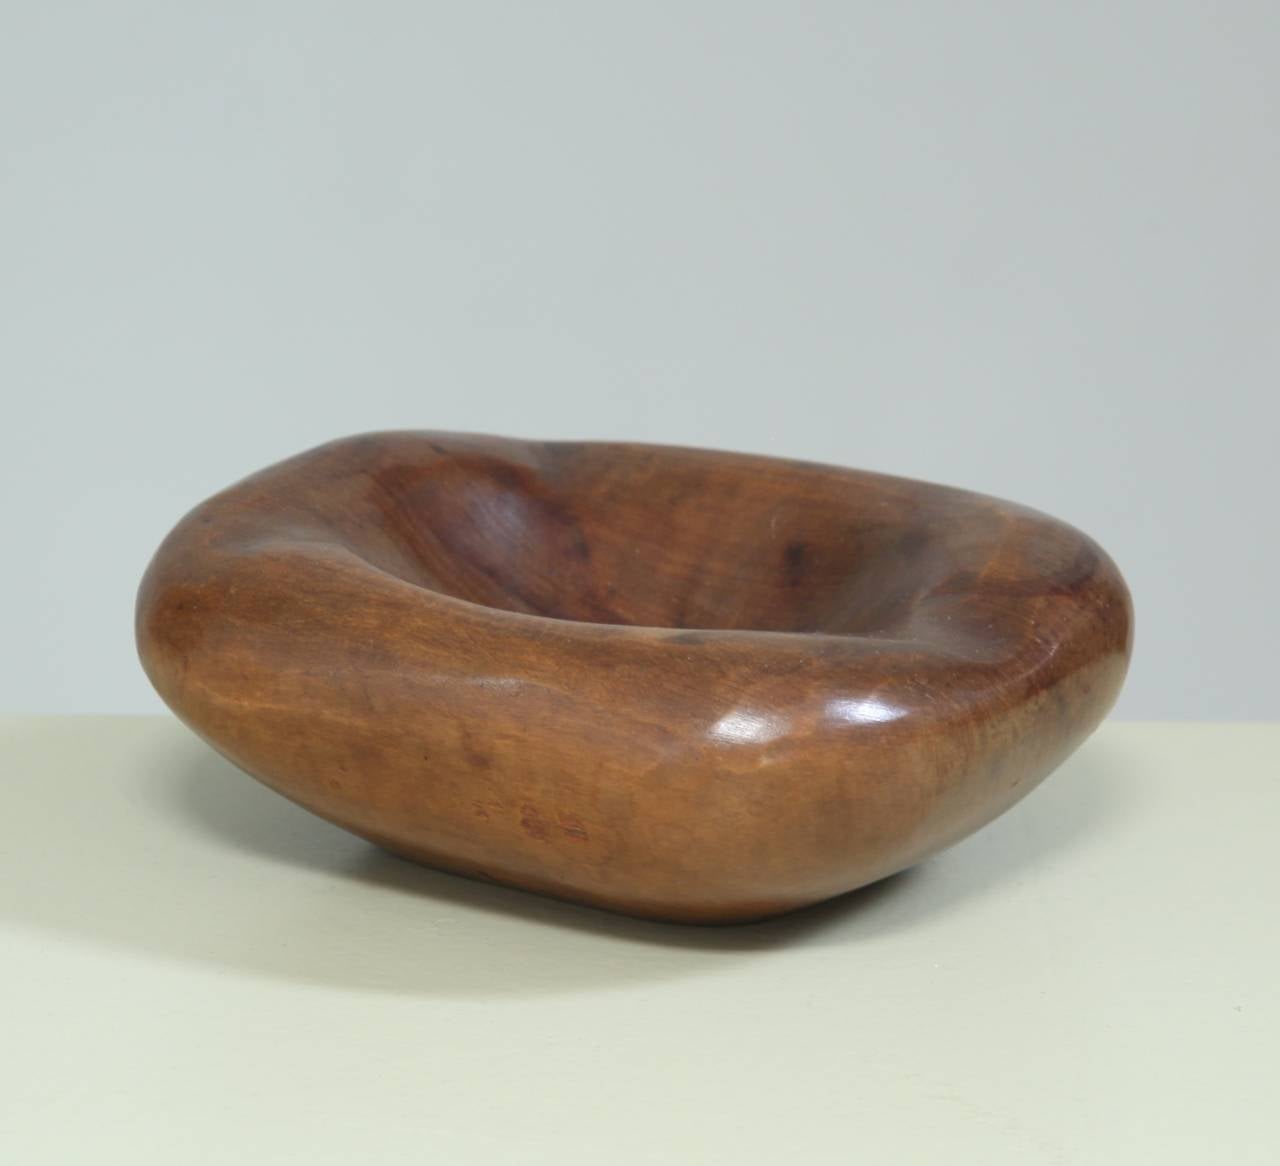 Wonderful, rounded wooden bowl by Alexandre Noll.
It has the typical Noll quality that you want to touch and hold.
Signed by Noll underneath.